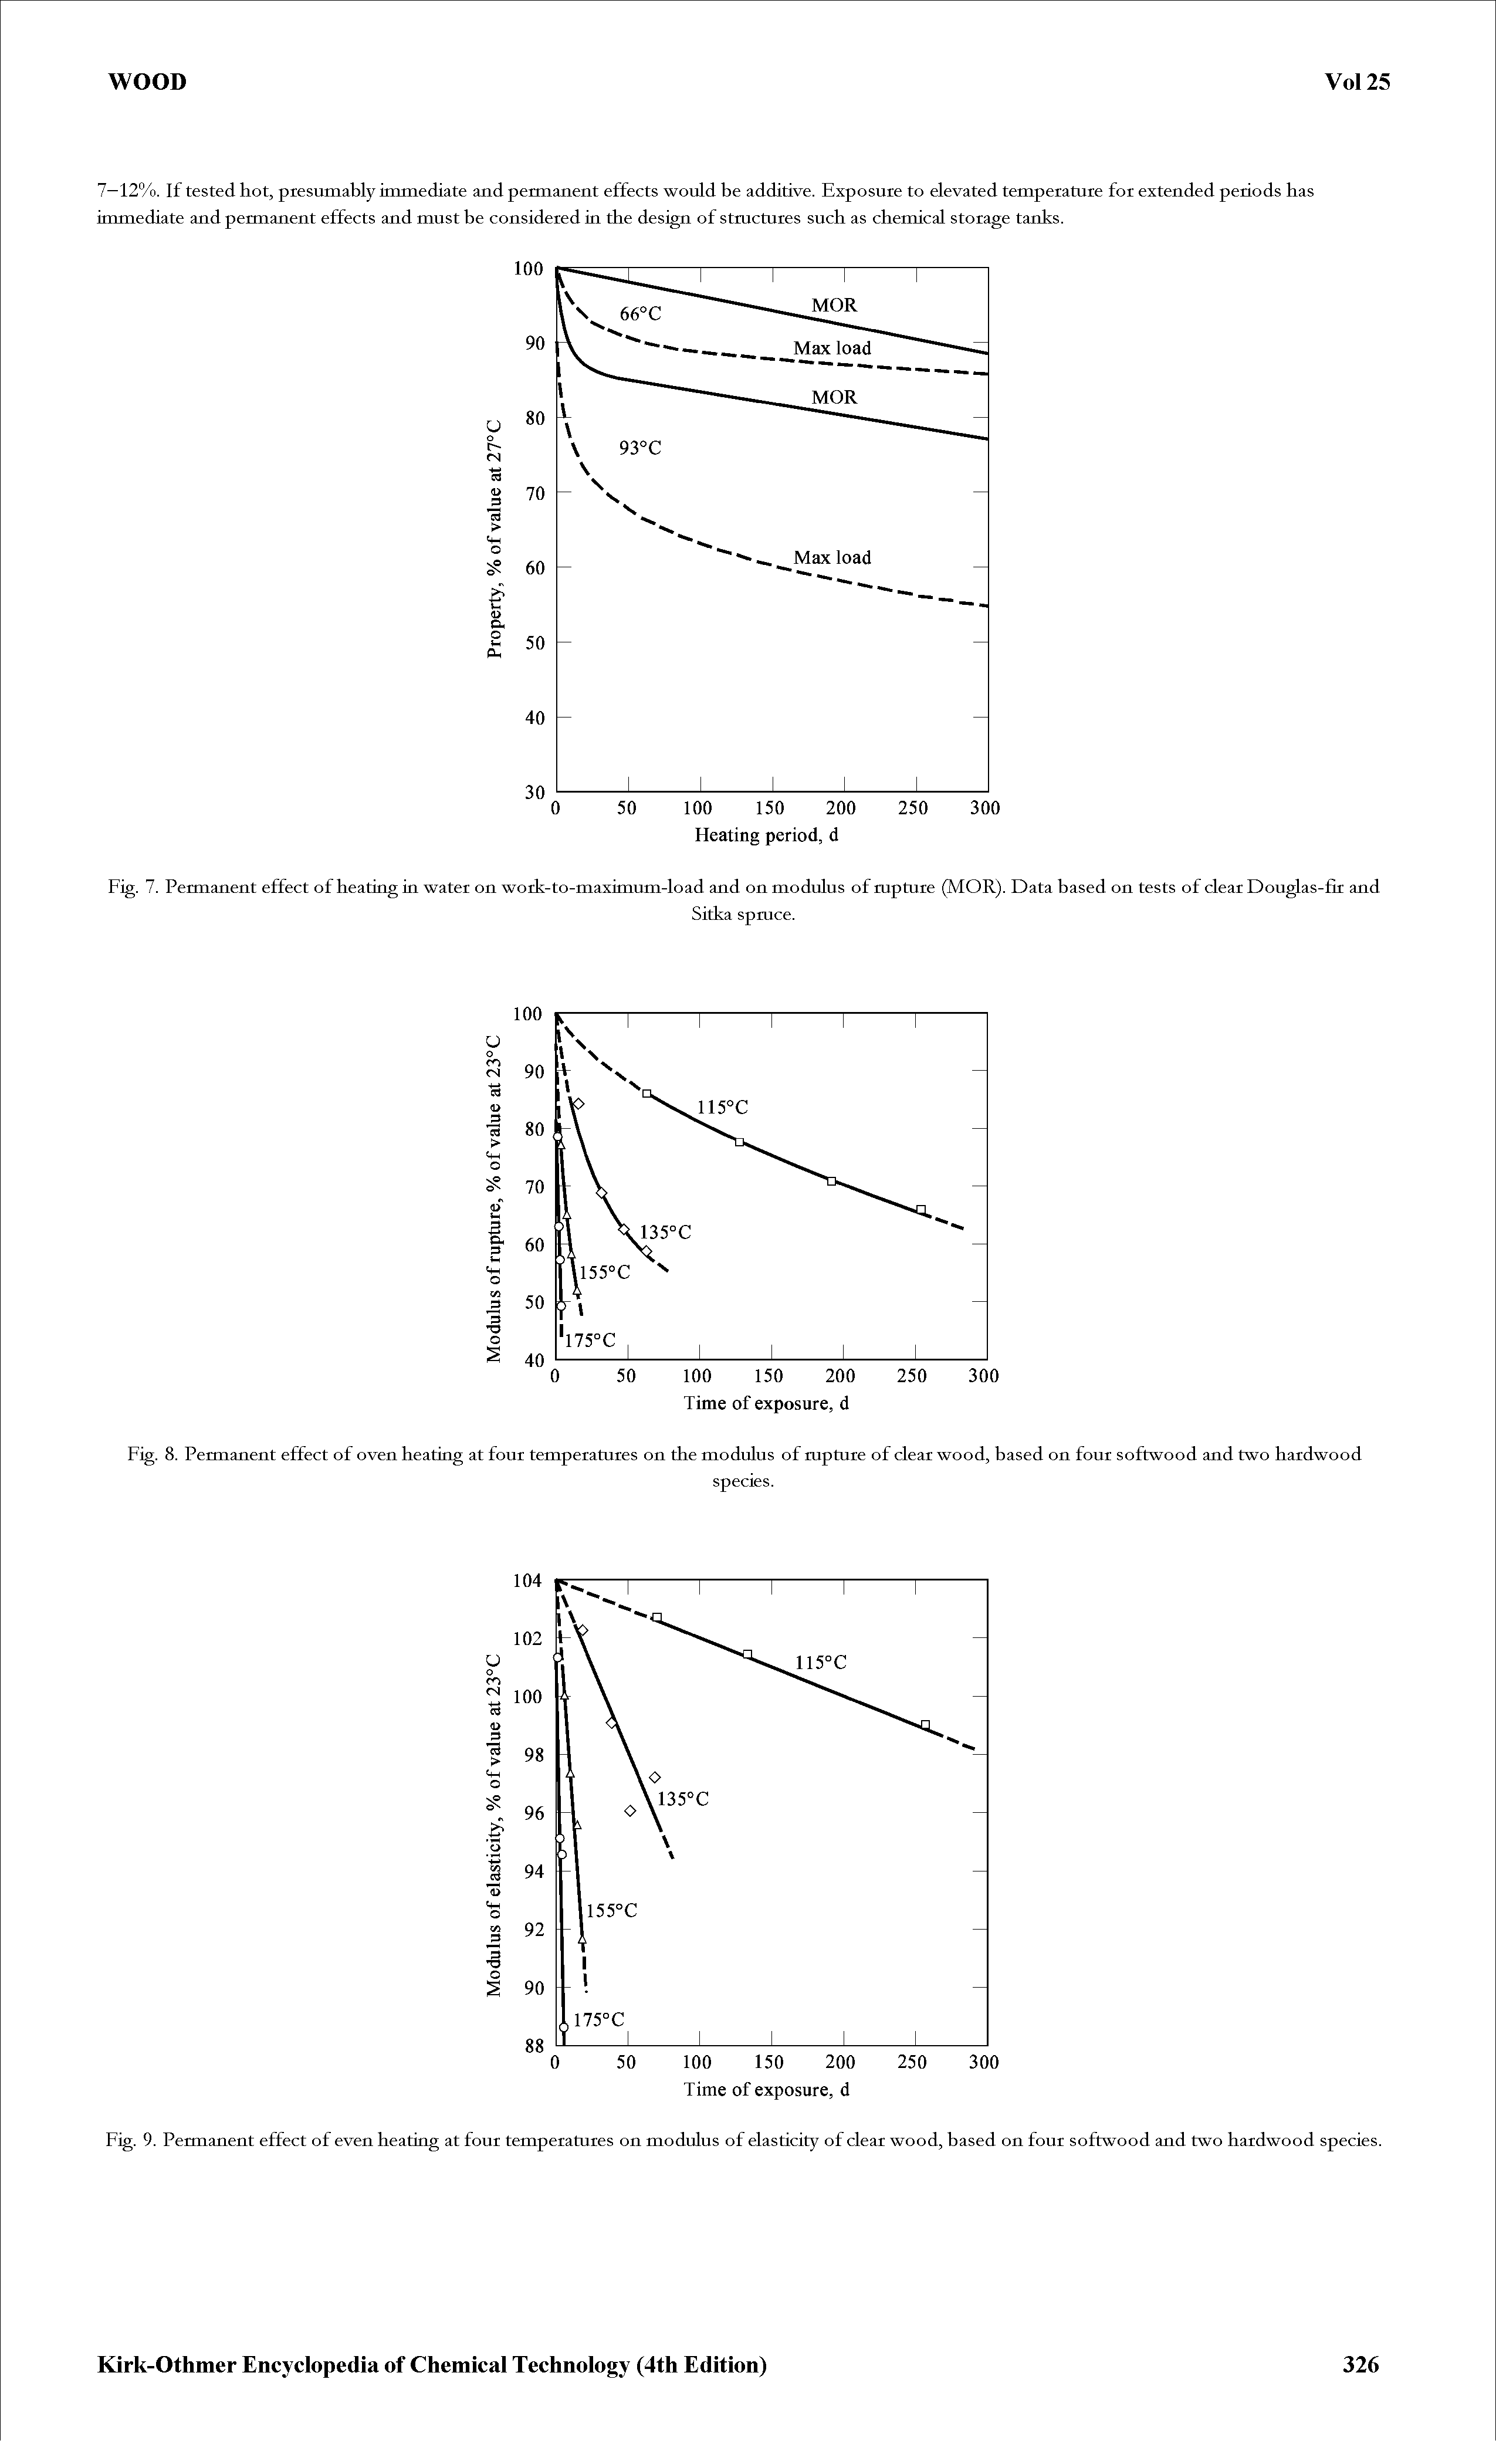 Fig. 7. Permanent effect of heating ia water on work-to-maximum-load and on modulus of mpture (MOR). Data based on tests of clear Douglas-fir and...